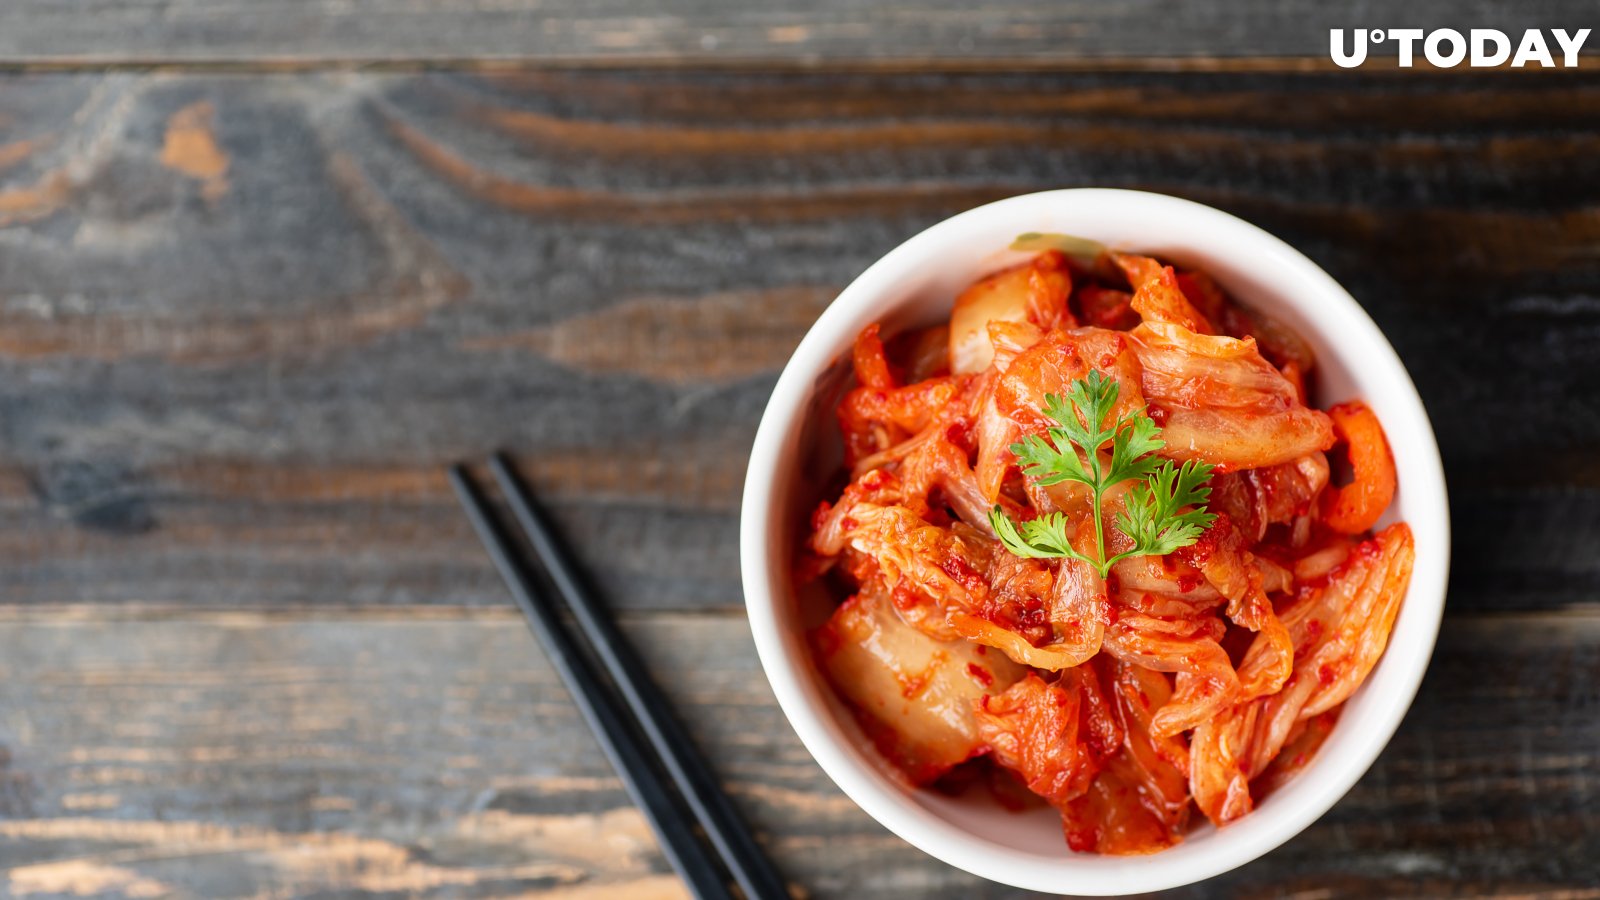 Bitcoin Hits $71,000 in South Korea as “Kimchi Premium” Goes Through the Roof